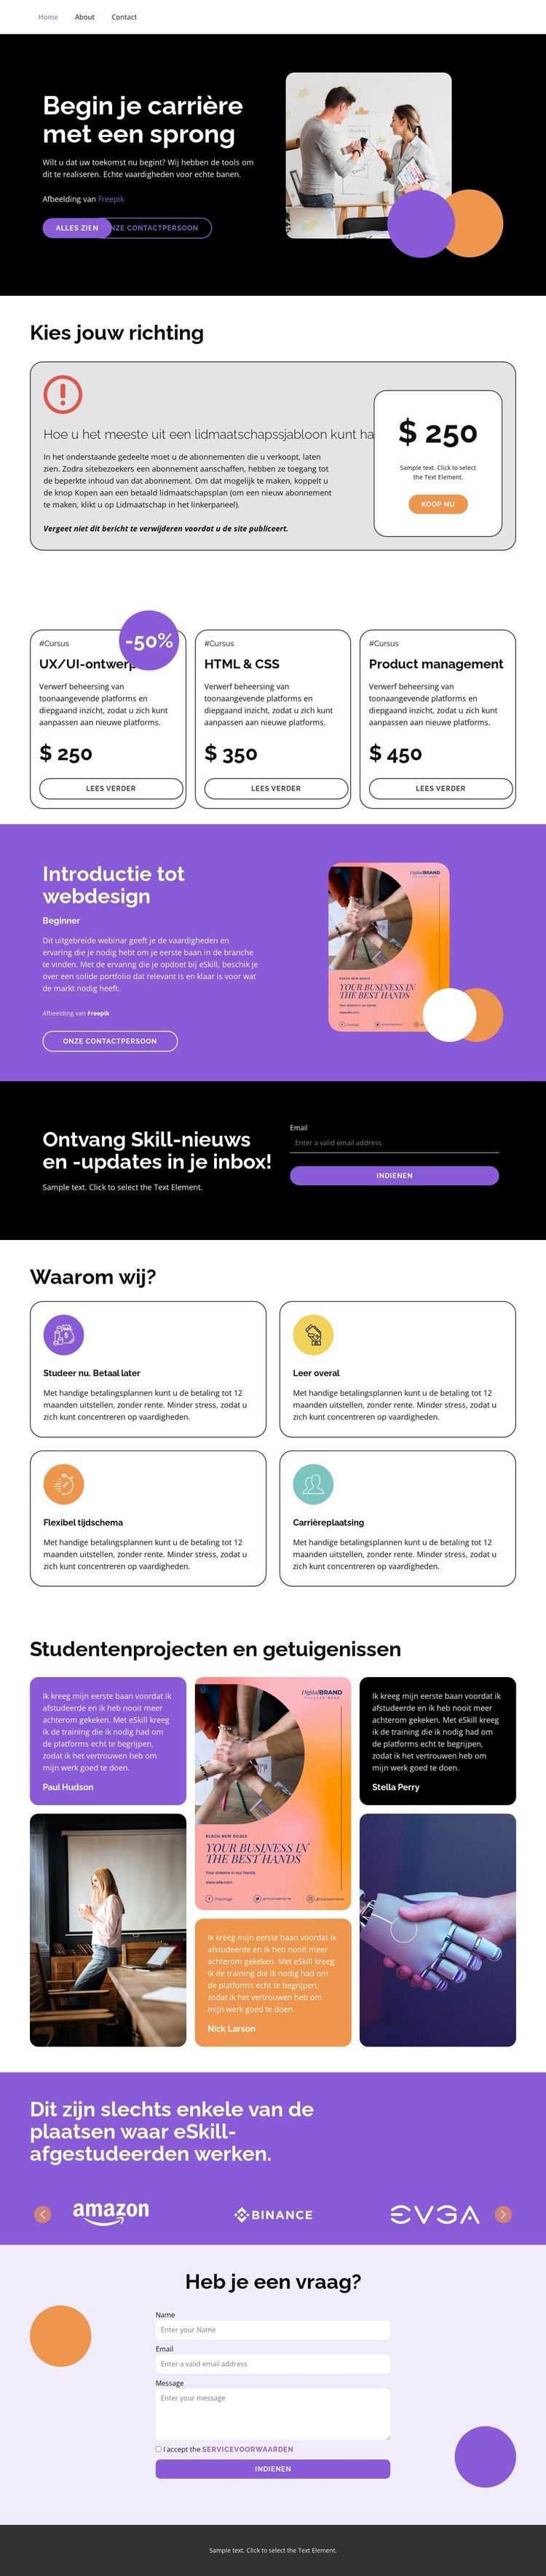 High-quality courses Website ontwerp